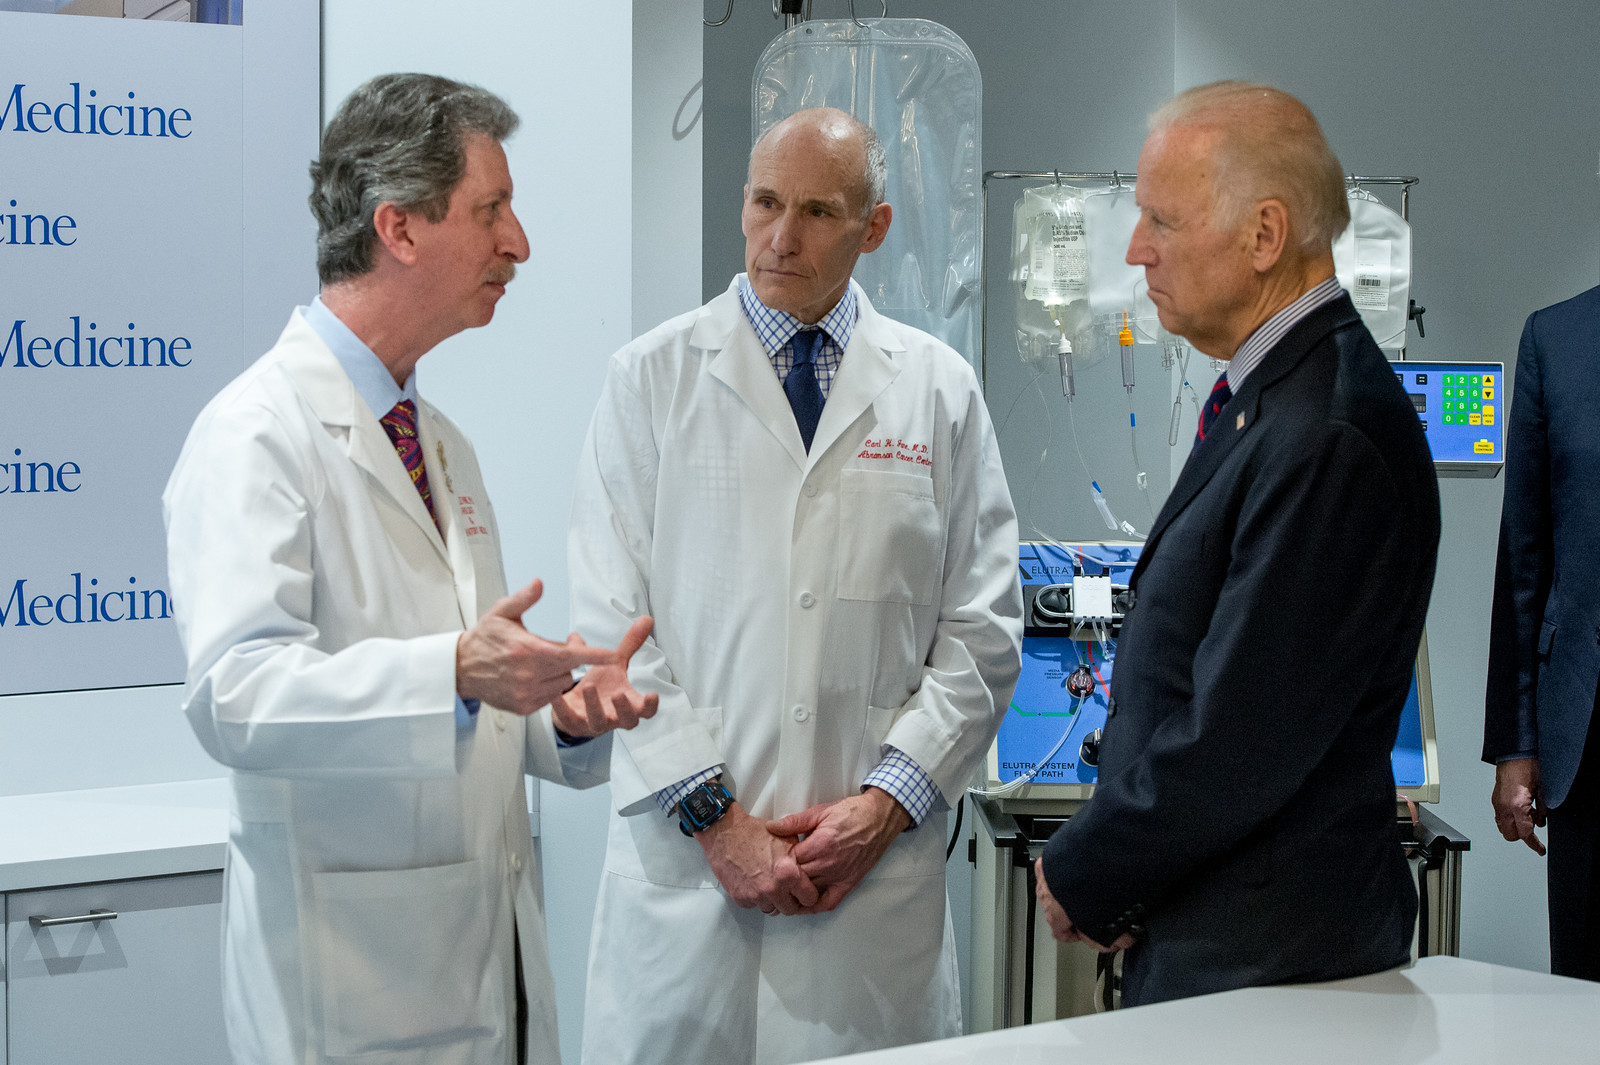 Vice President Joe Biden launches the national “Moonshot” cancer cure initiative